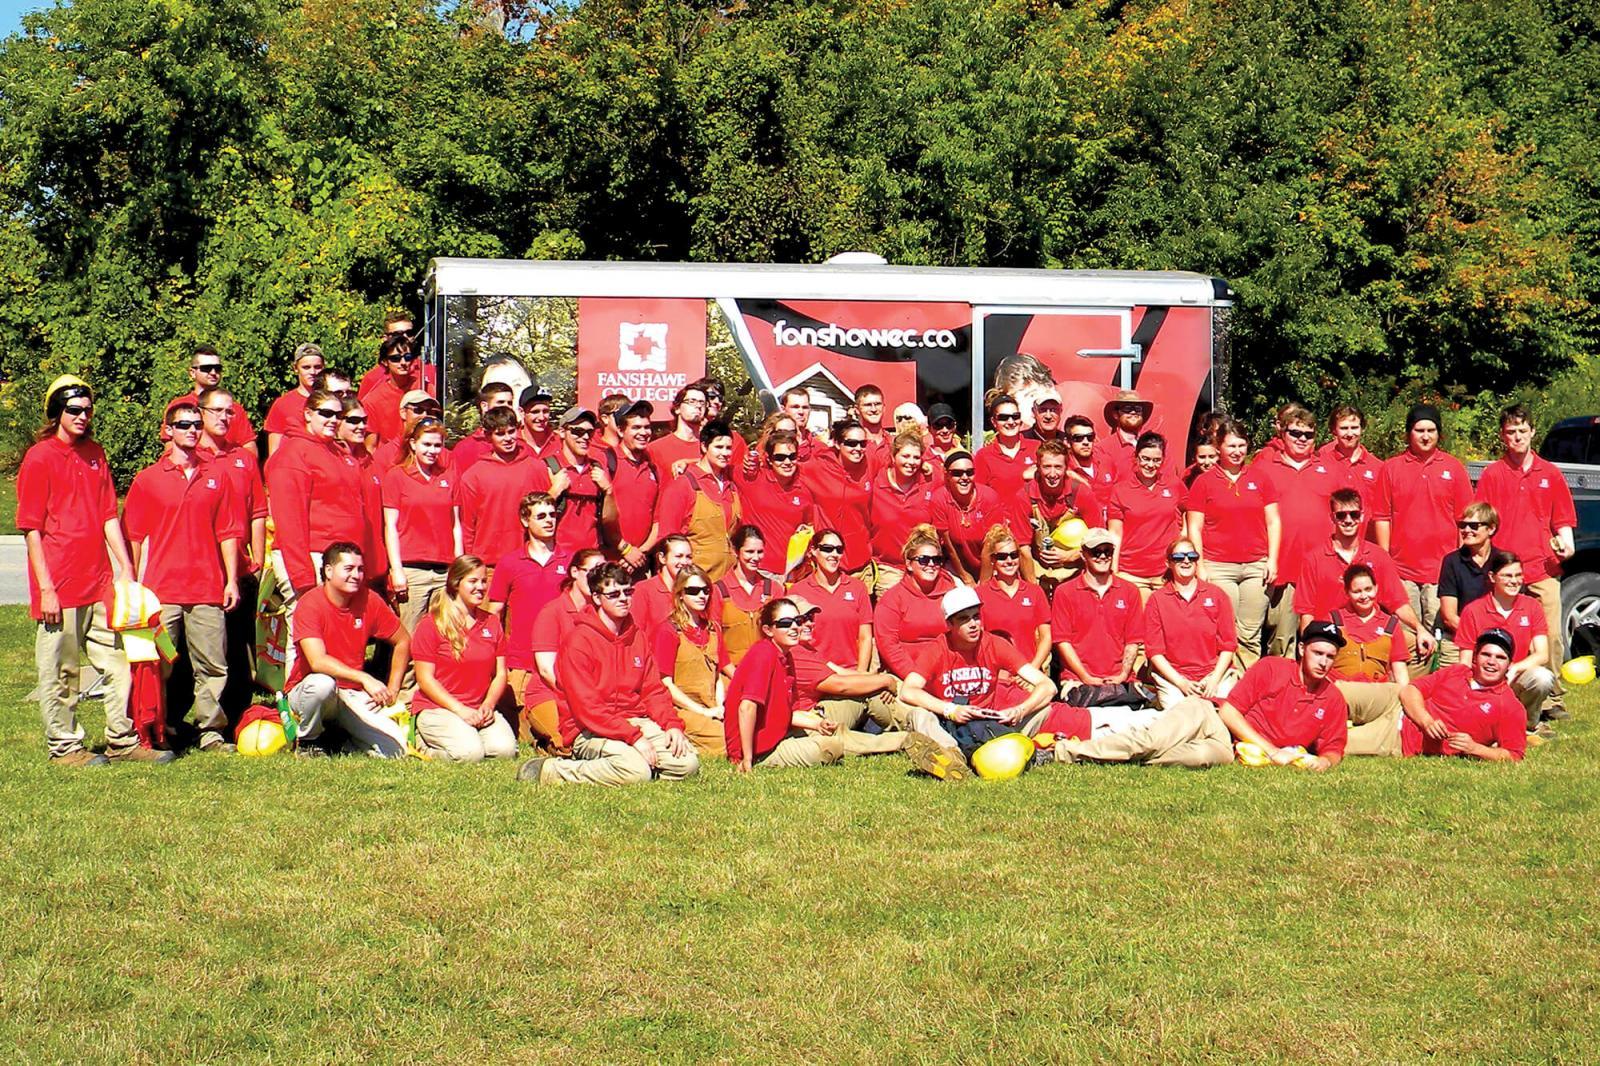 Fanshawe College students, dressed in their distinctive red, offered their services to help guide volunteers to plant over 400 trees along the Veterans Memorial Parkway in London.